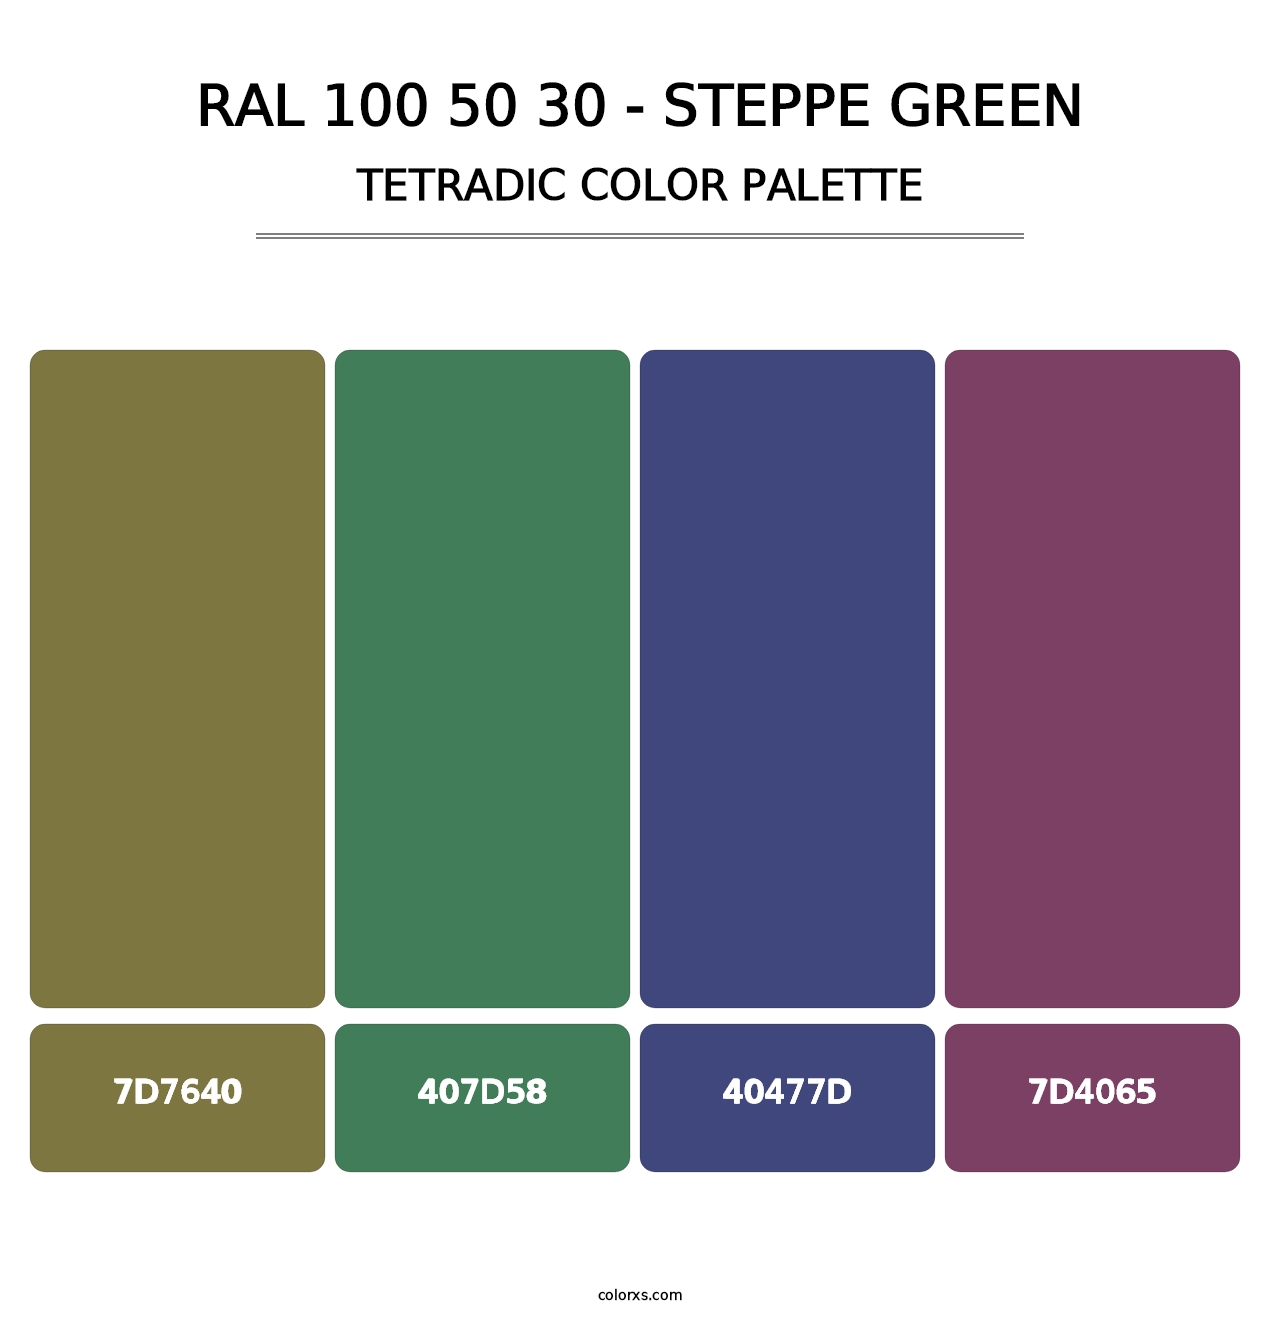 RAL 100 50 30 - Steppe Green - Tetradic Color Palette